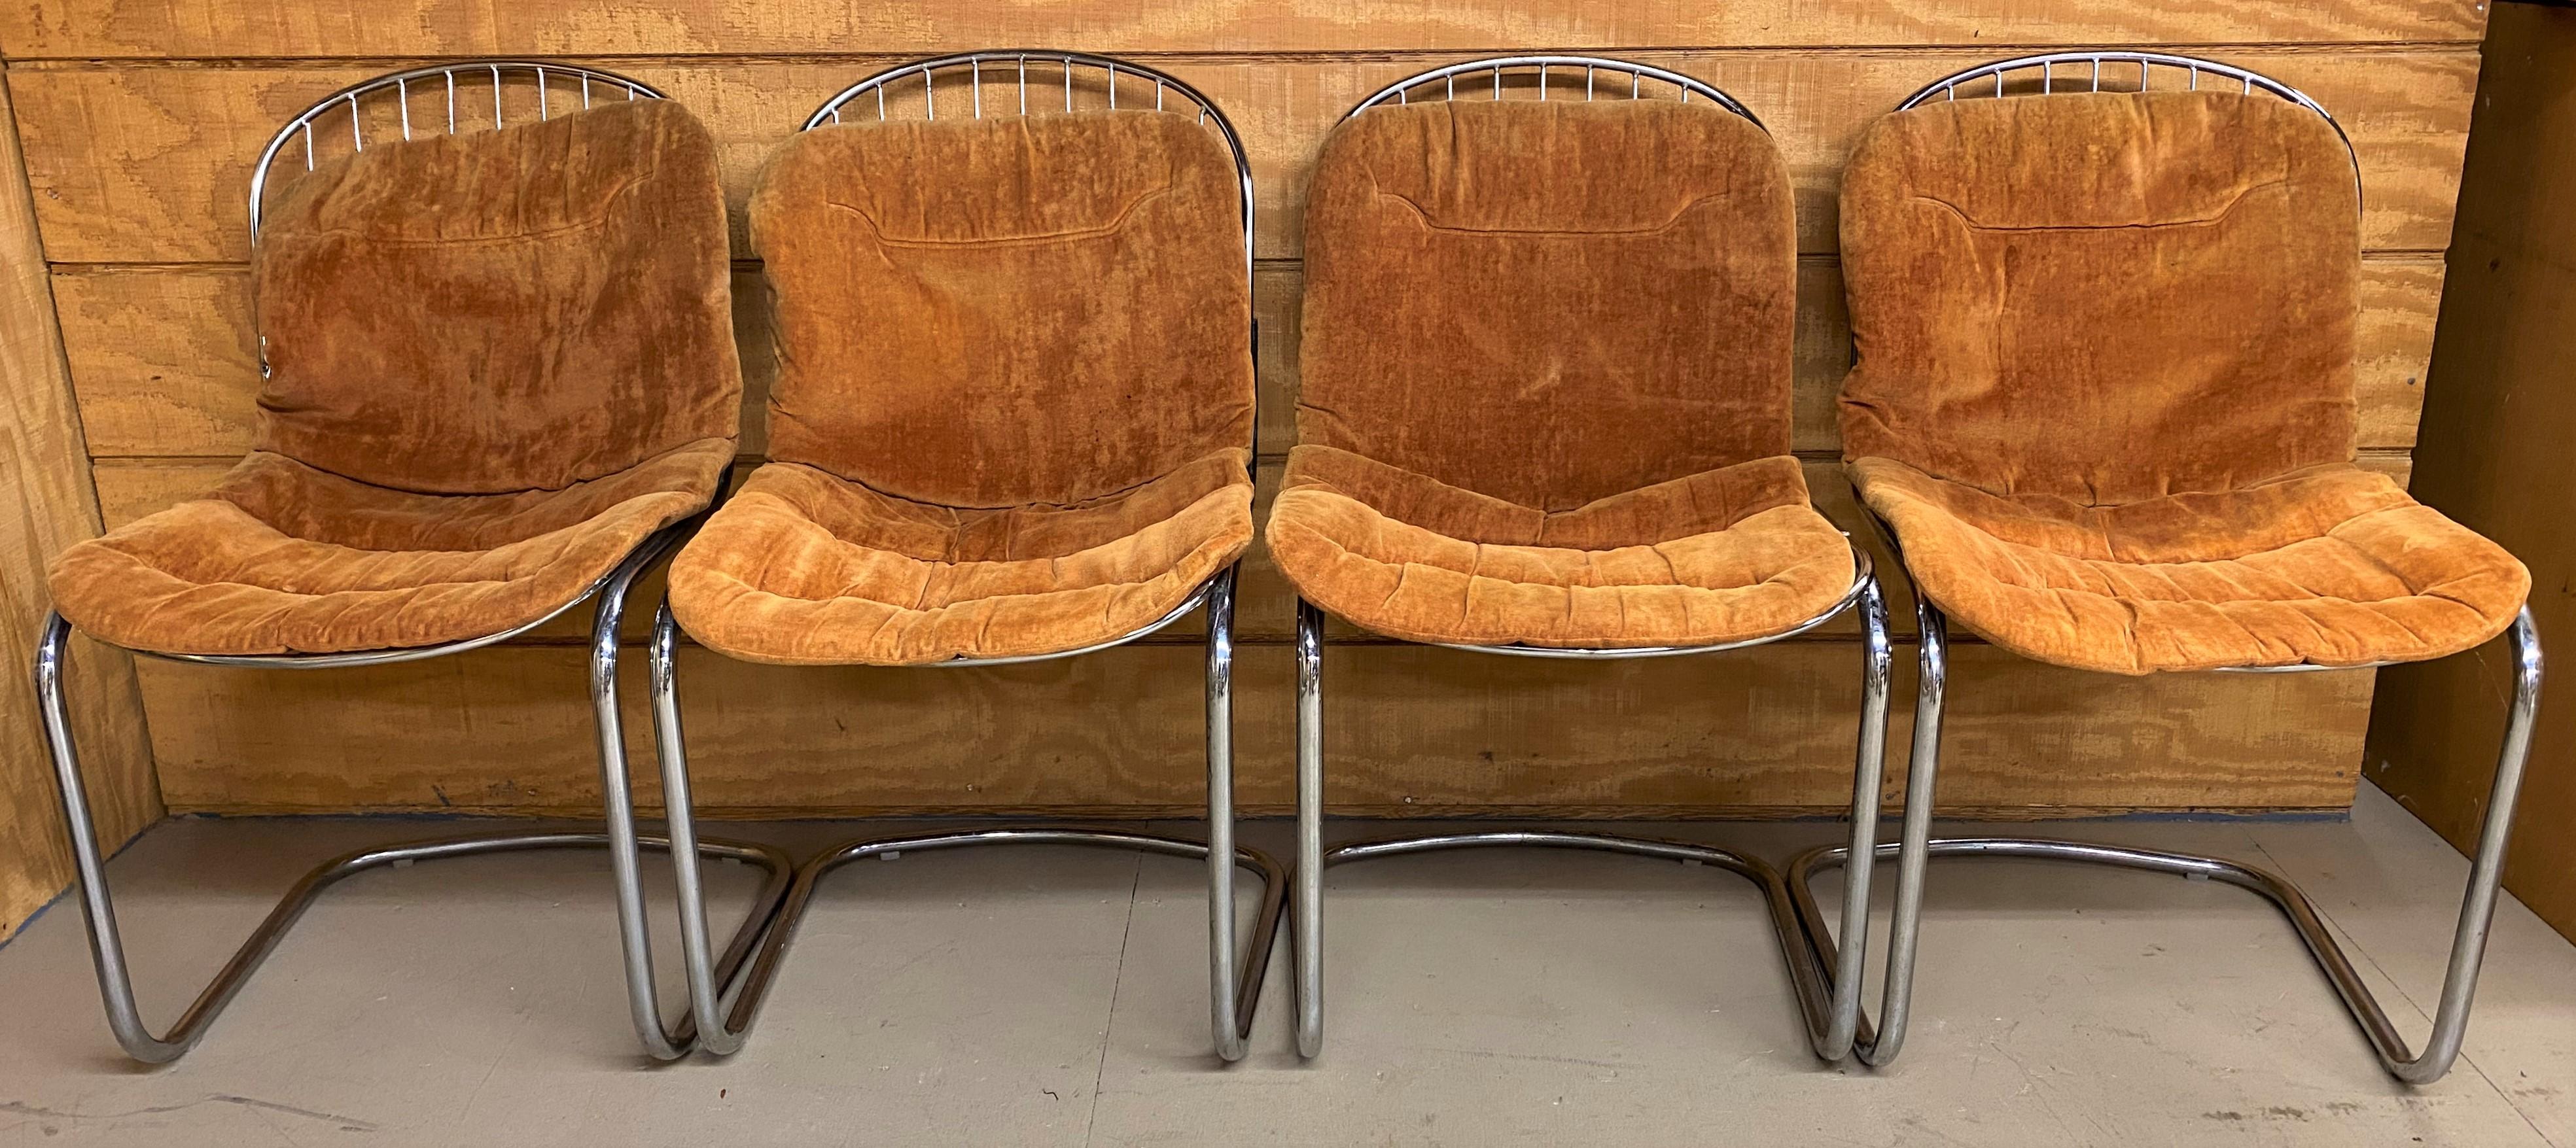 A fine set of four mid century chrome wire dining chairs in the manner of Italian designer Gastone Rinaldi (1920-2006), with original orange cushions, circa 1970’s. Good overall condition, with some minor surface spotting on chrome, as well as a few